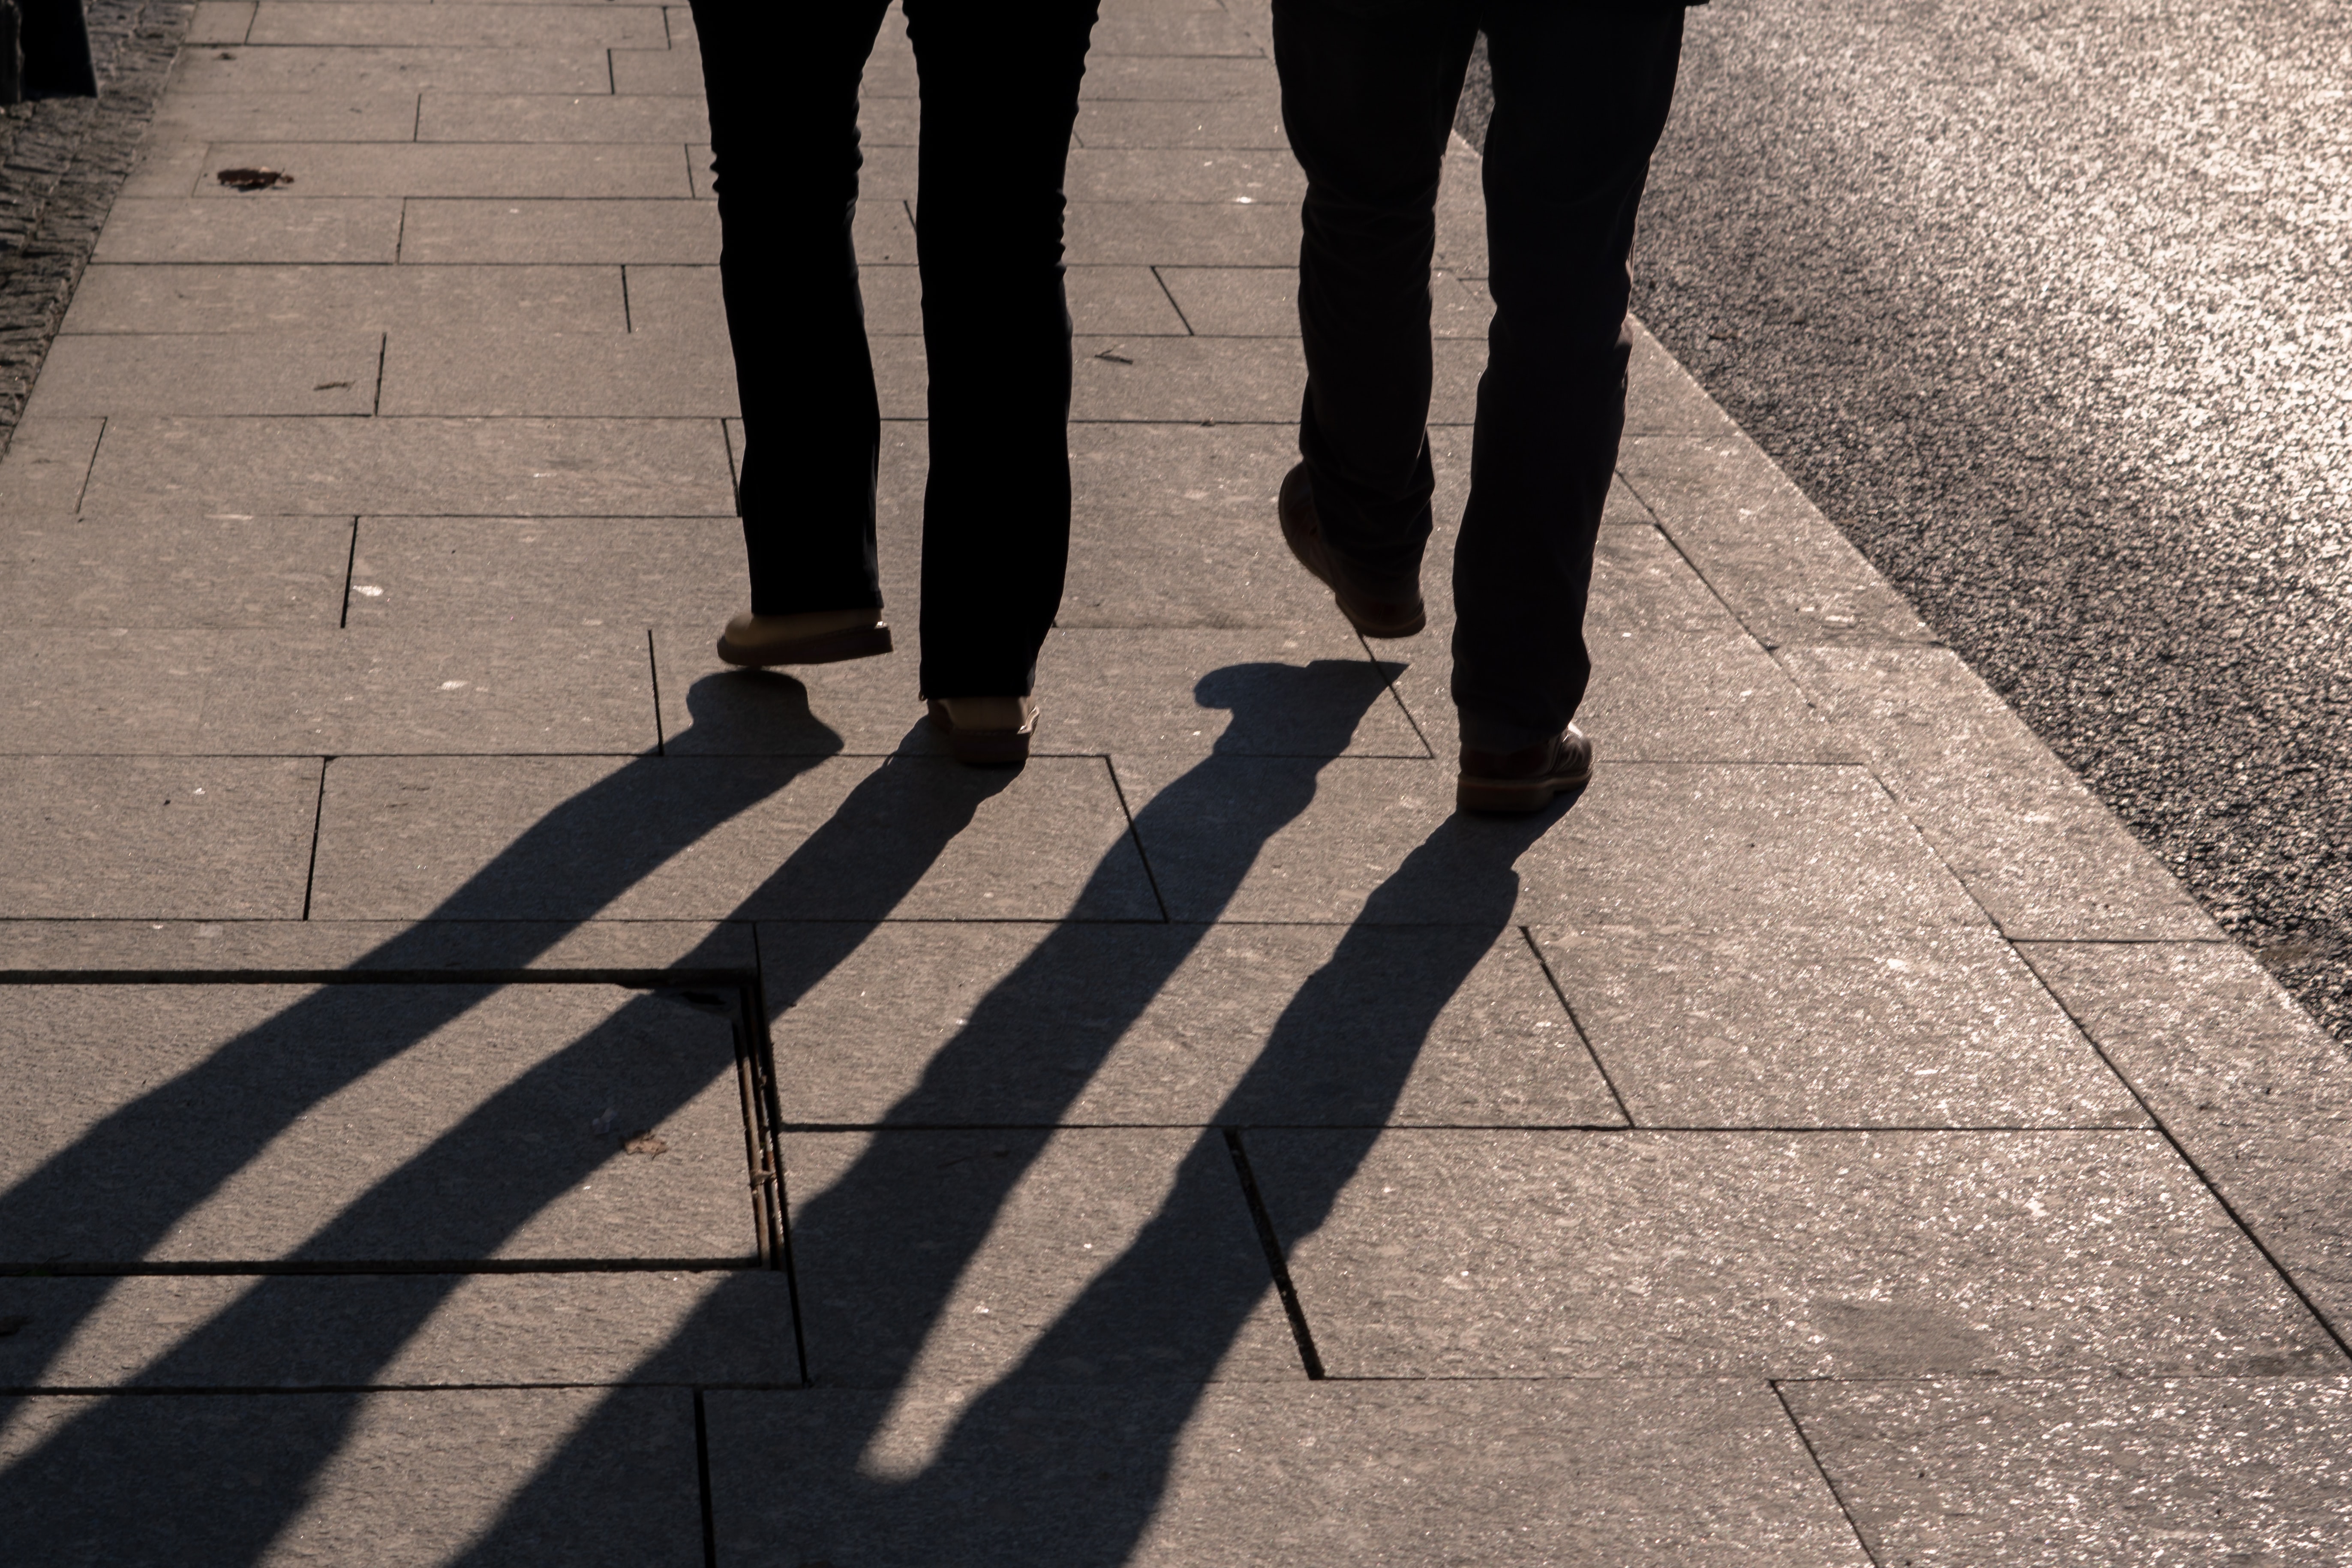 Two people's feet walking on a pavement